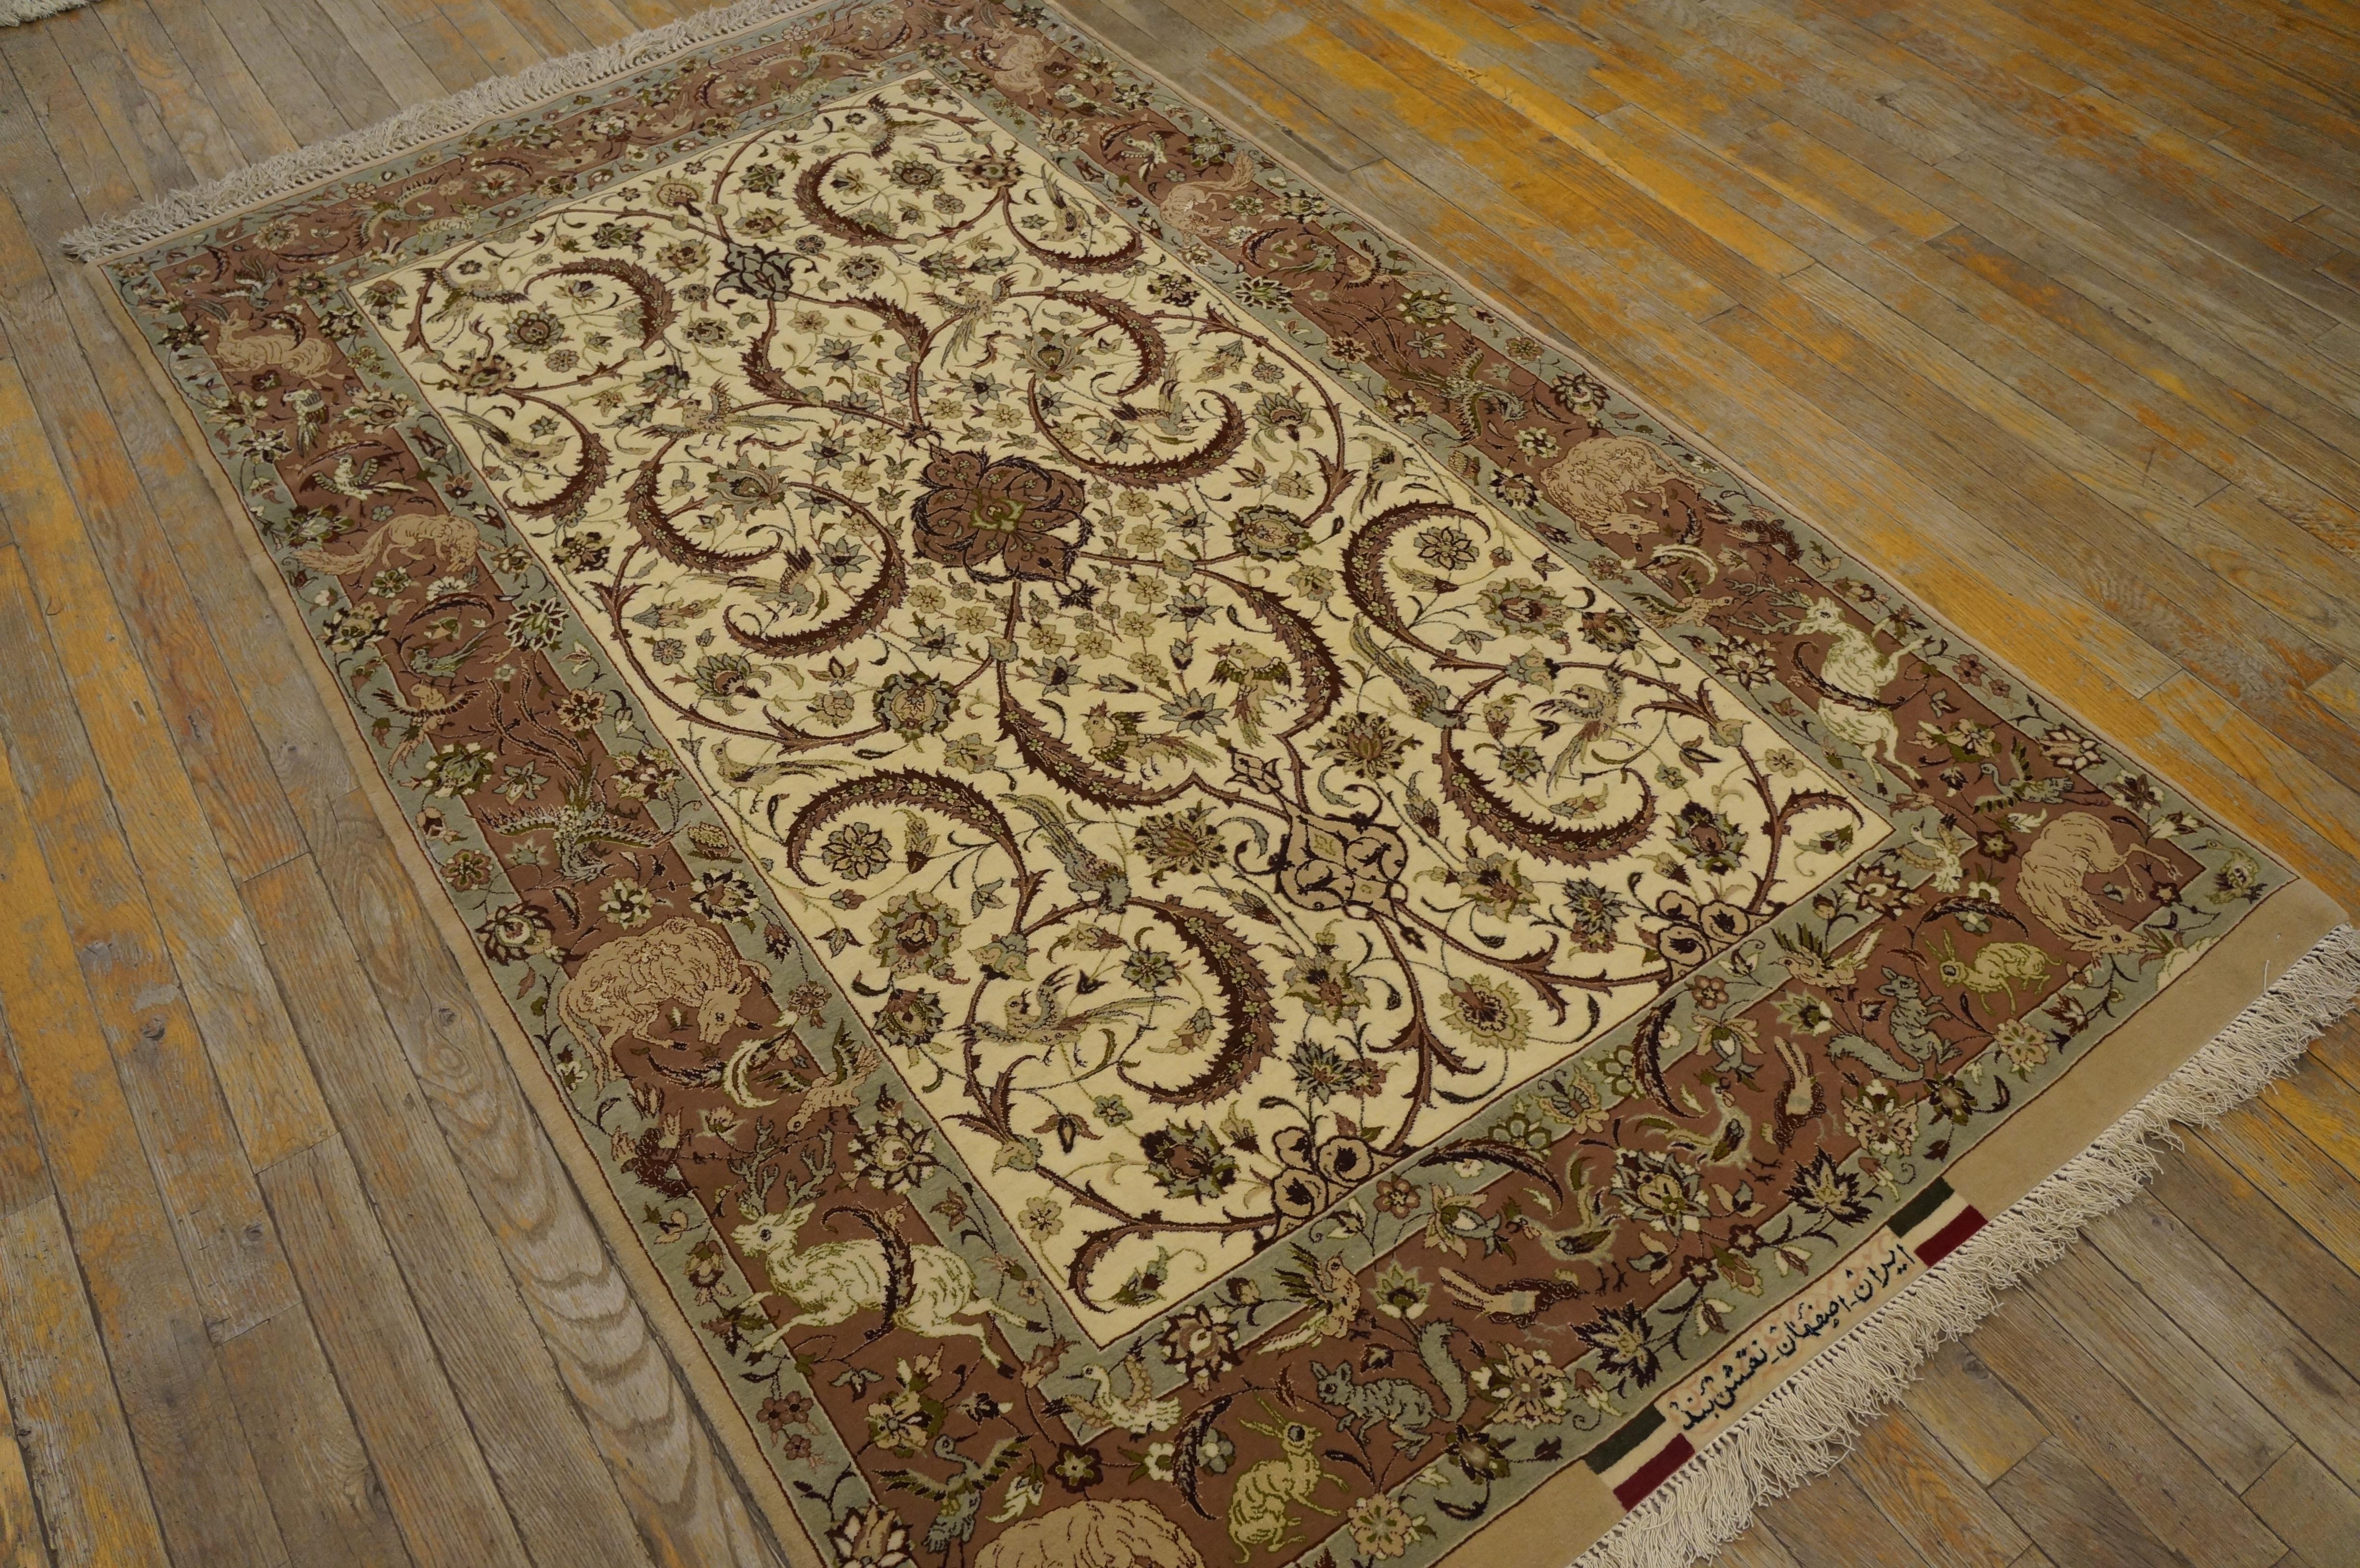 Antique fine Persian Isfahan rug. Measures: 3'6